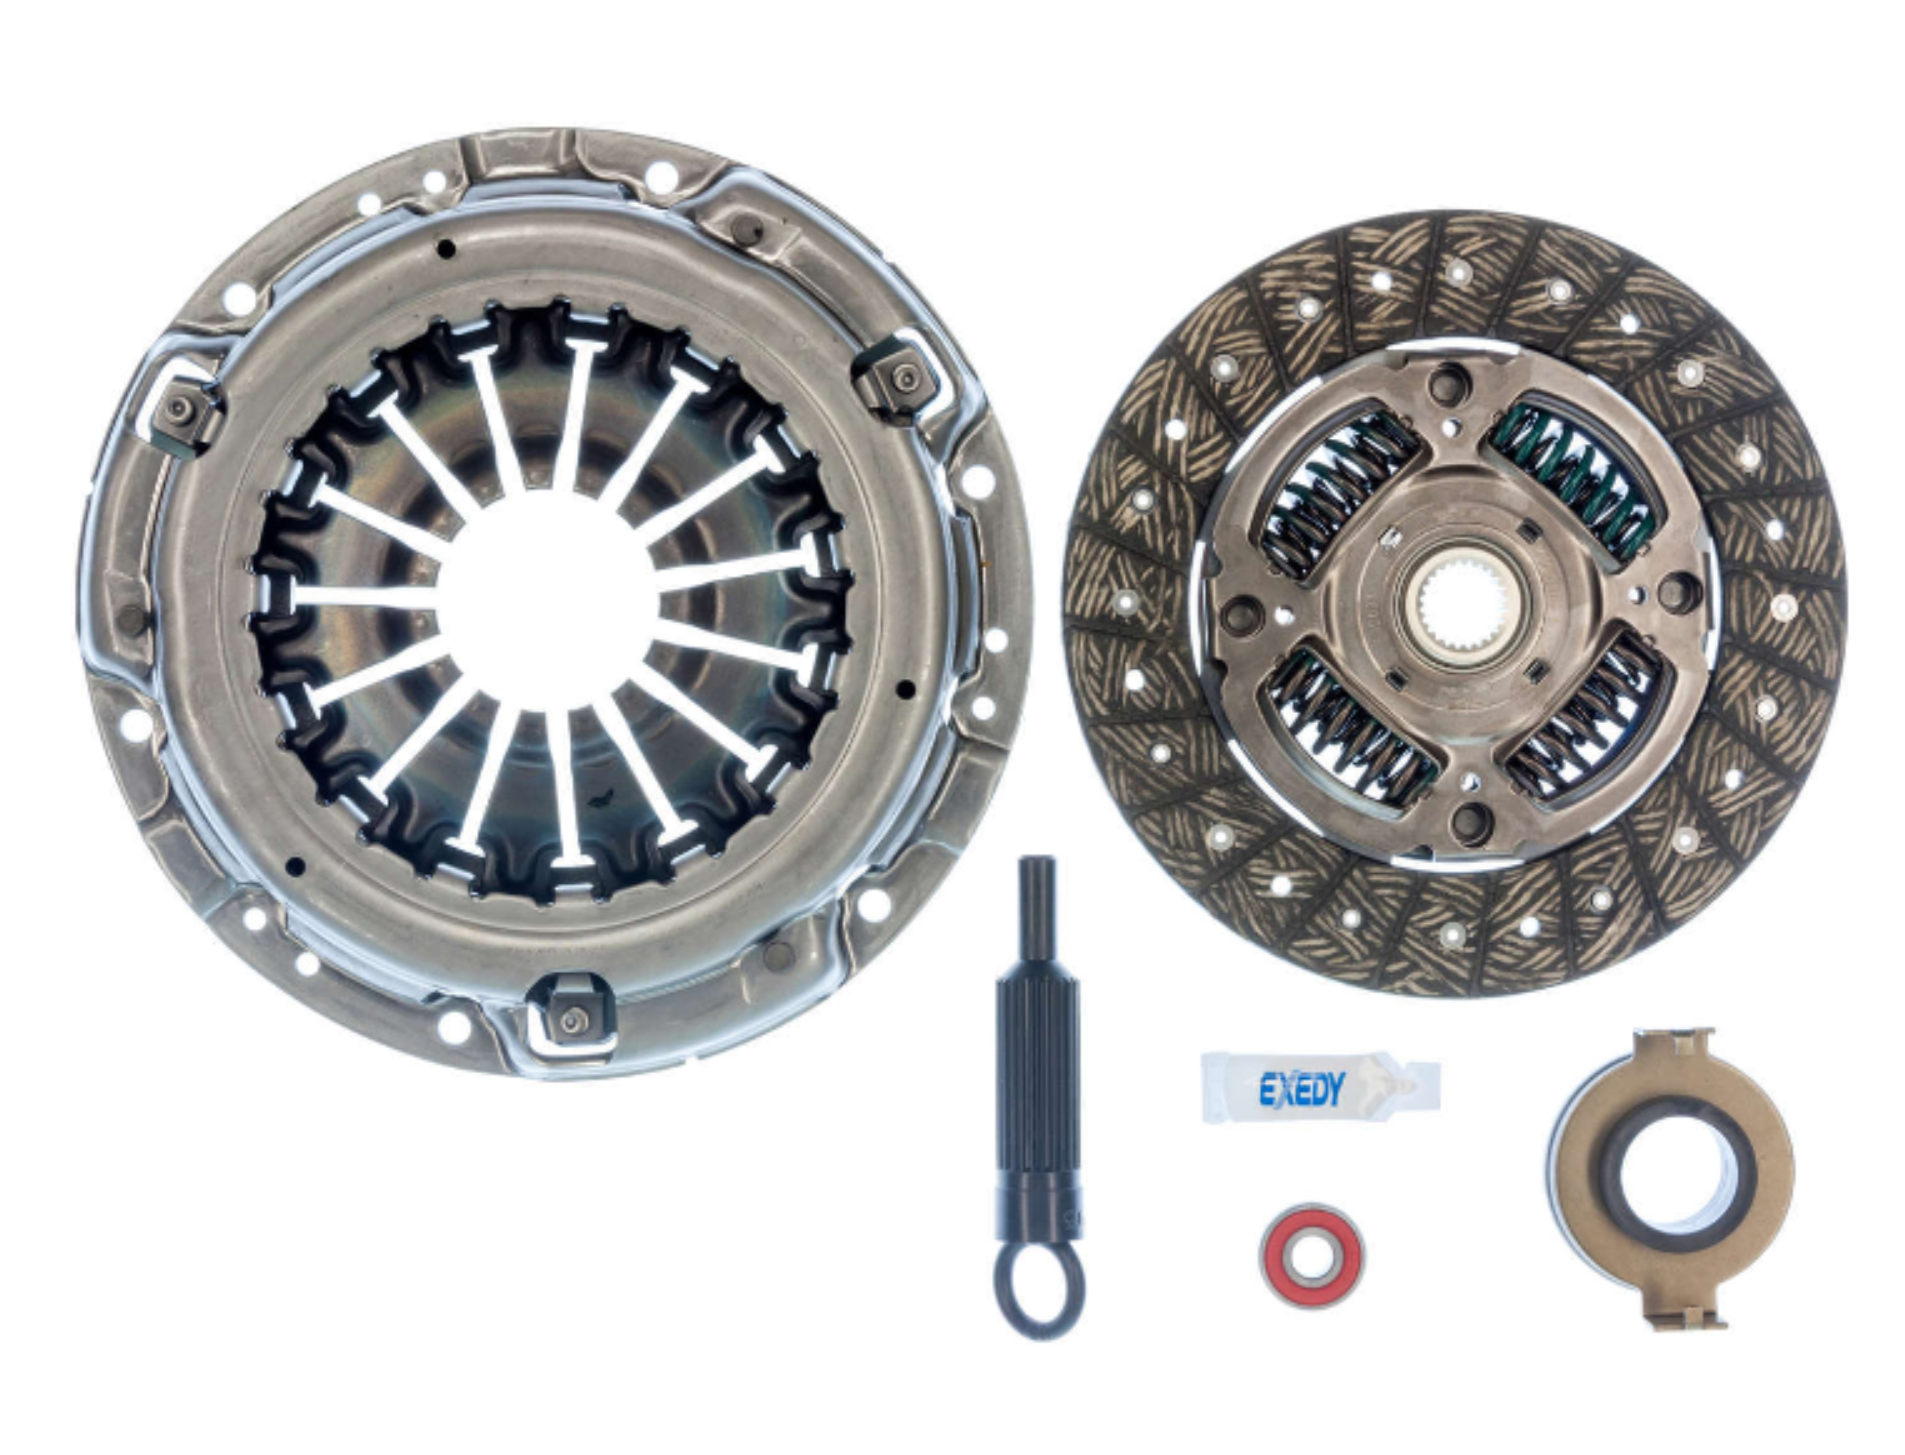 Exedy OEM Replacement Clutch Kit | Multiple Fitments